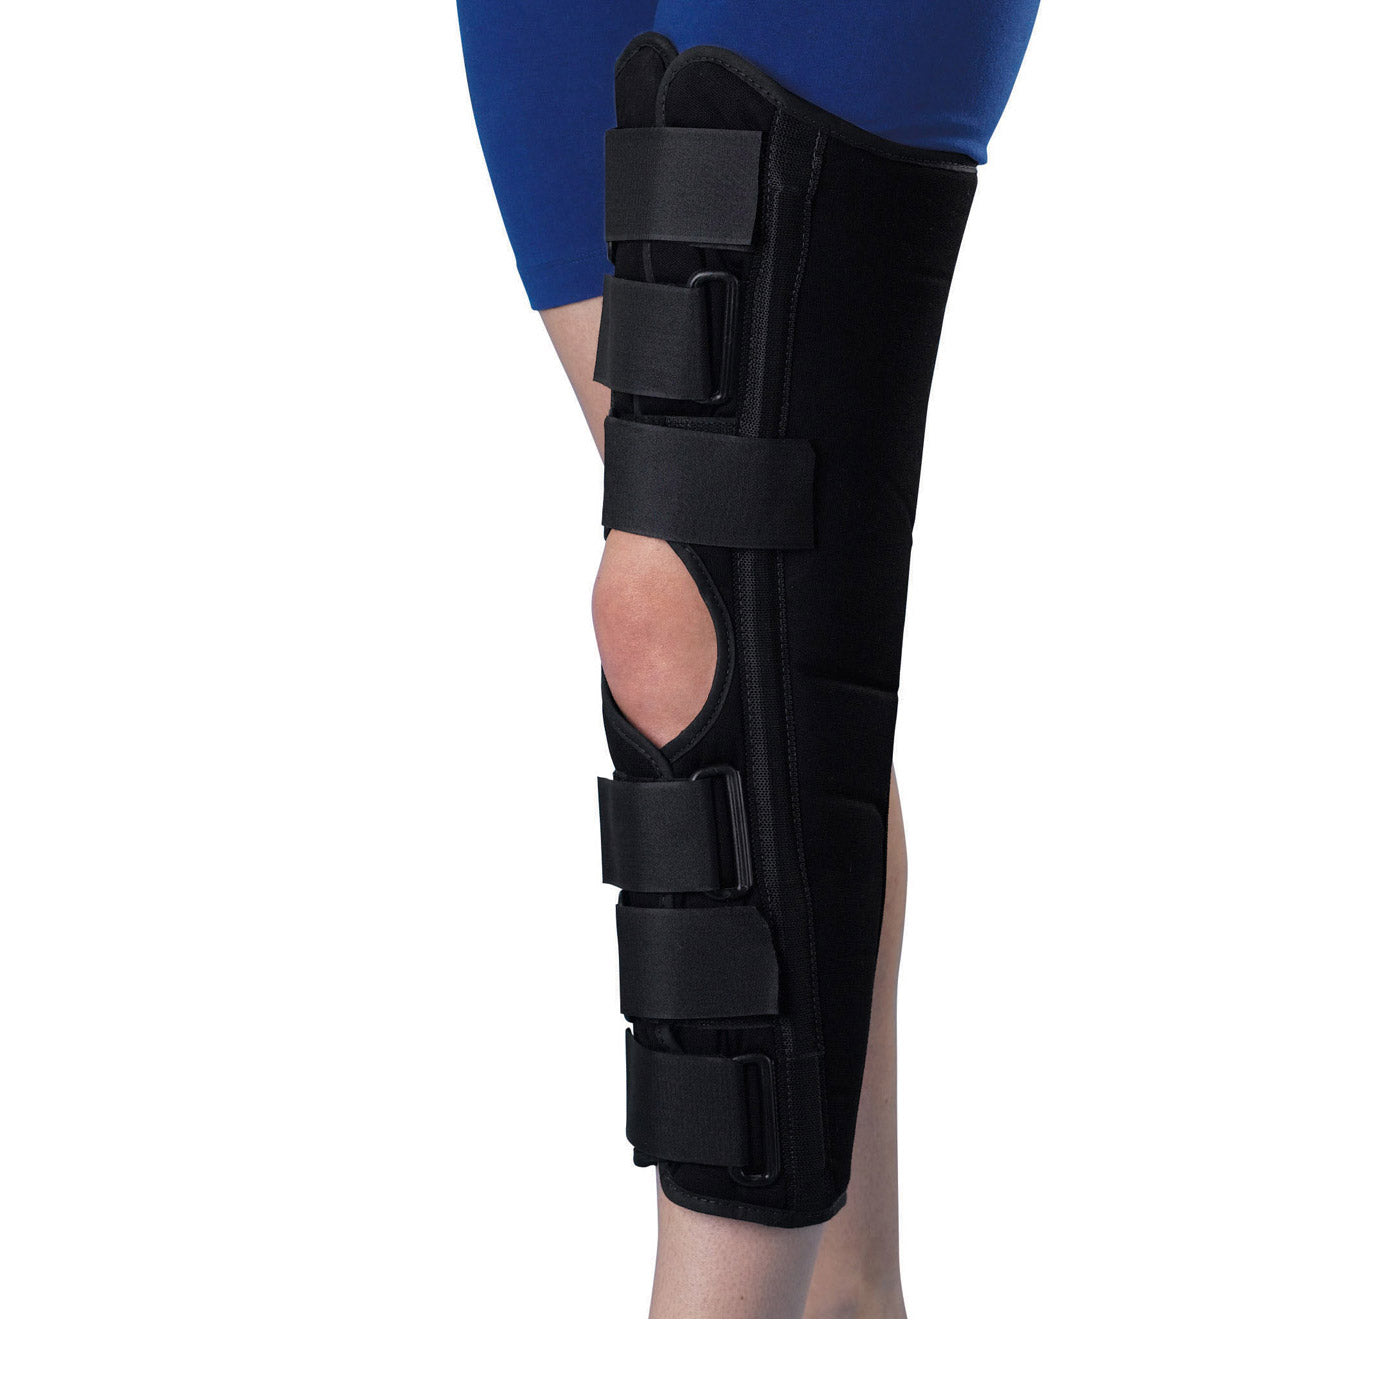 Immobilizer Knee Deluxe 20  LG